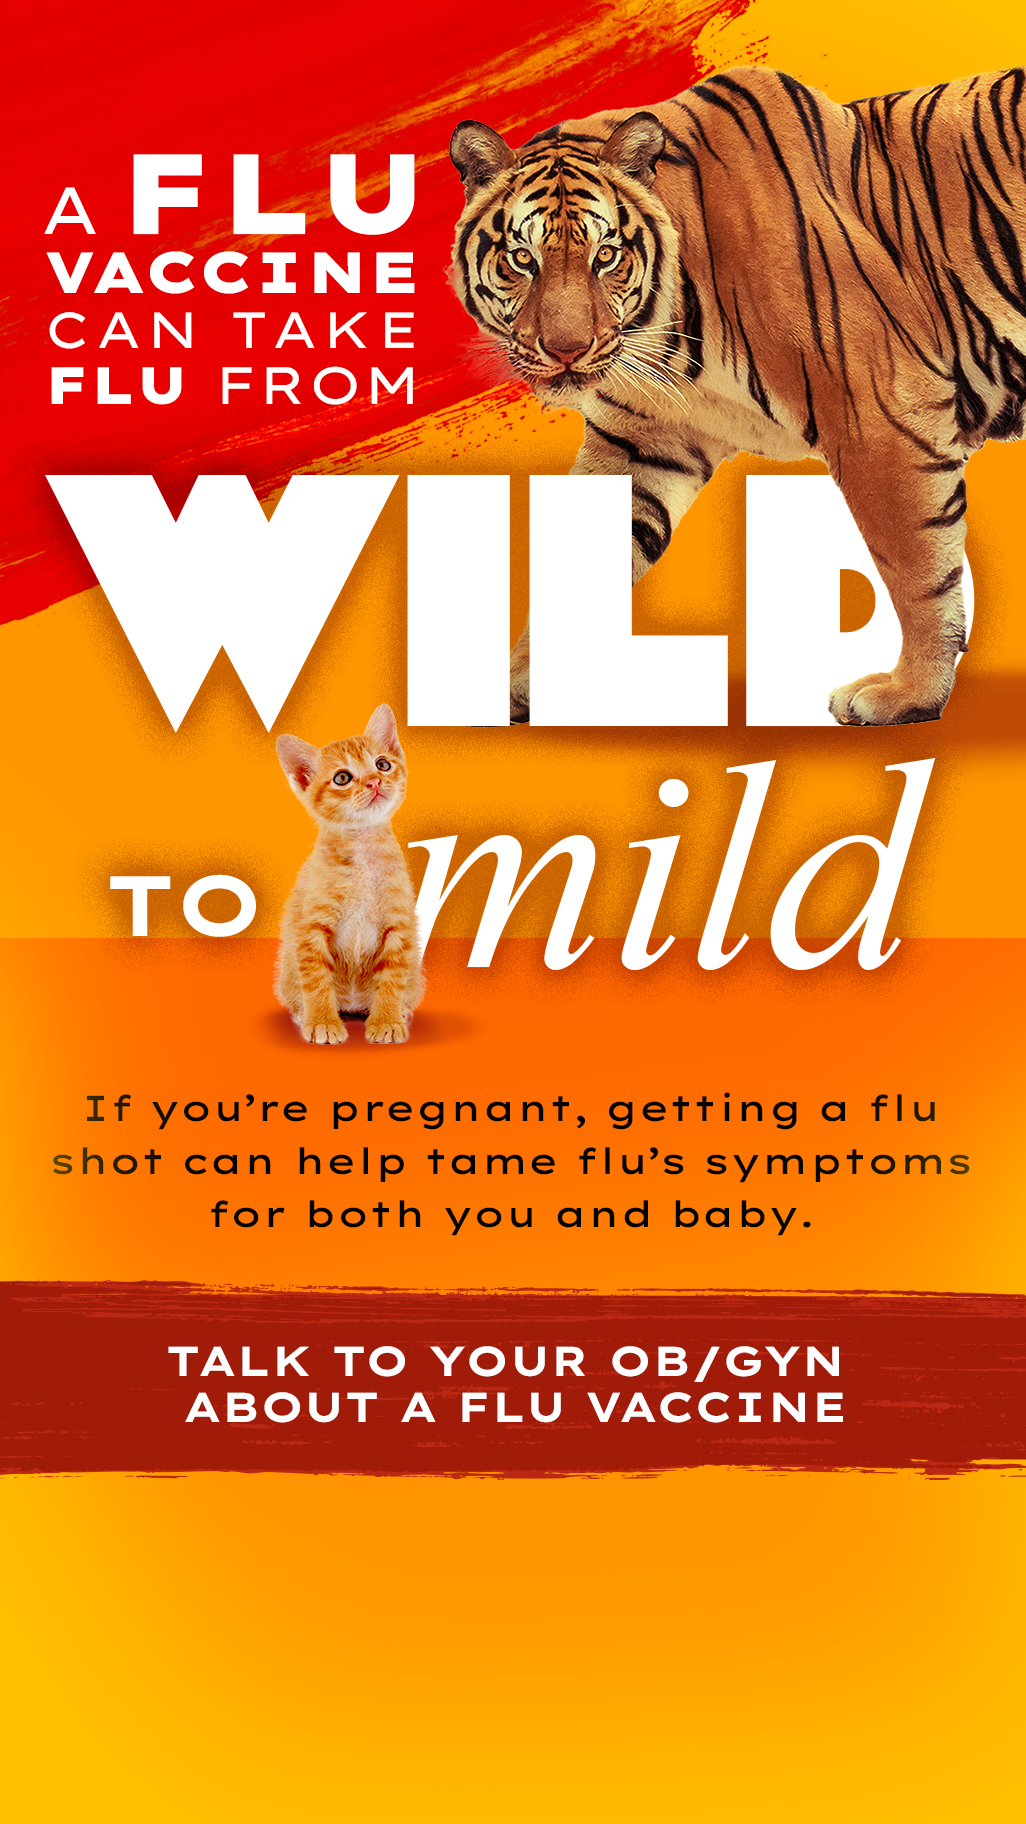 tiger with text: A flu vaccine can take flu from wild to mild, If you're pregnany, getting a flu shot can help tame flu's symptoms for both you and baby.